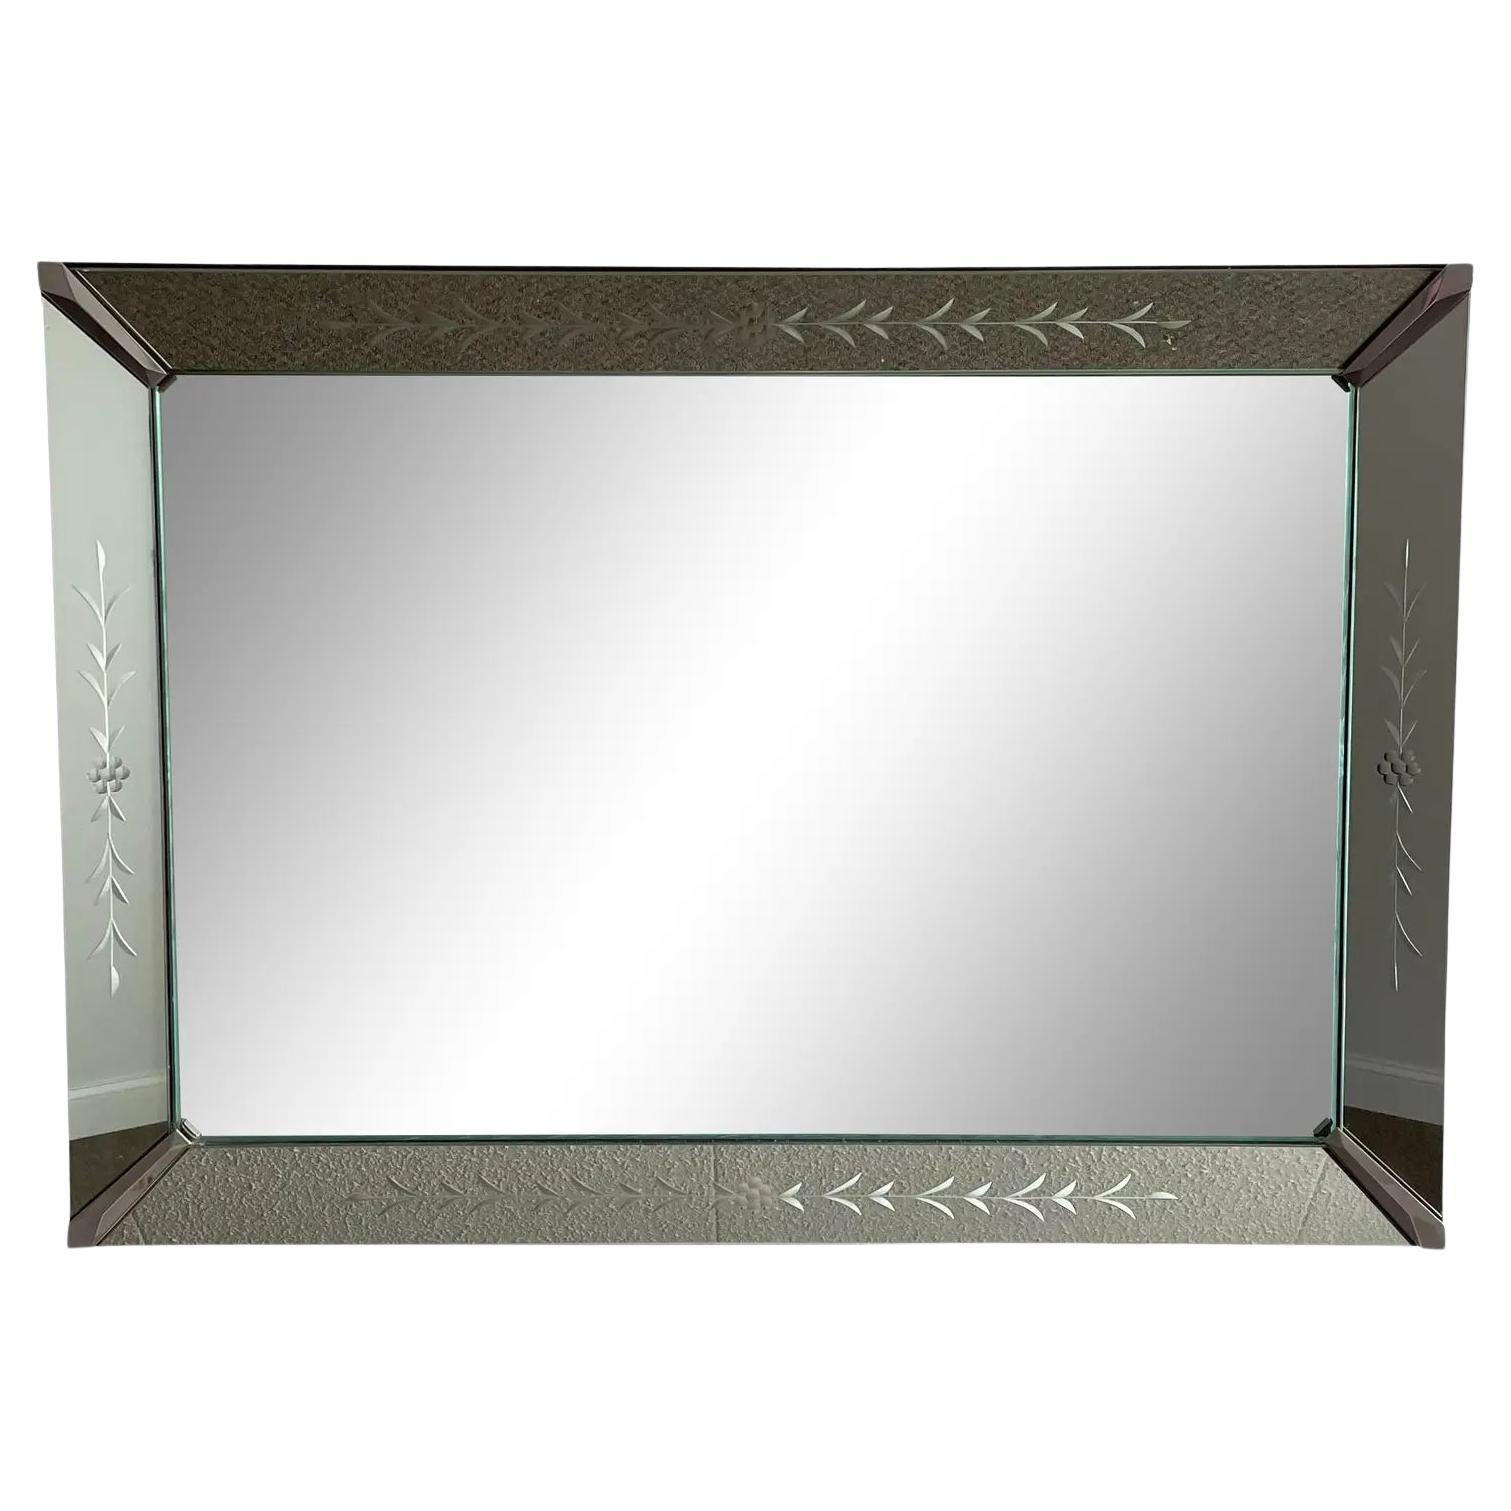 Vintage Art Deco Venetian Etched Wall Mirror For Sale